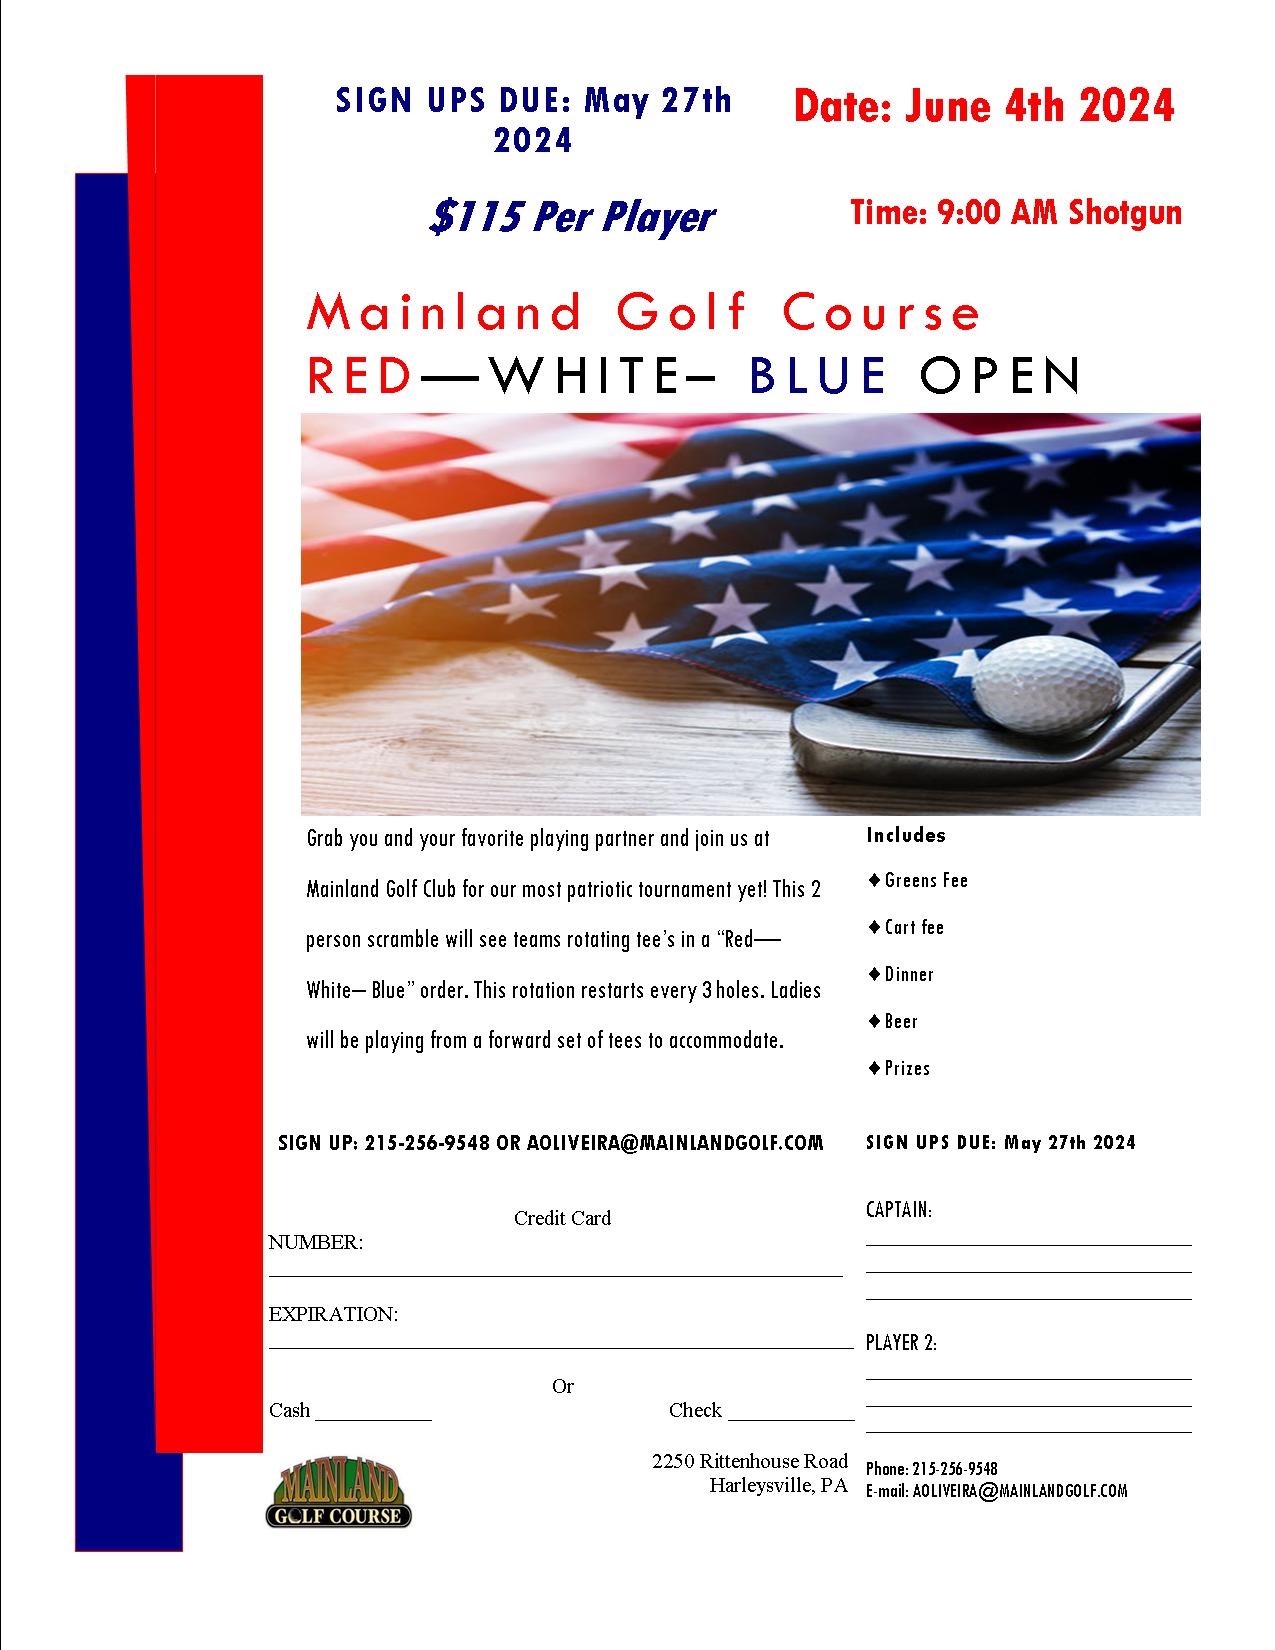 RED WHITE BLUE OPEN FLYER